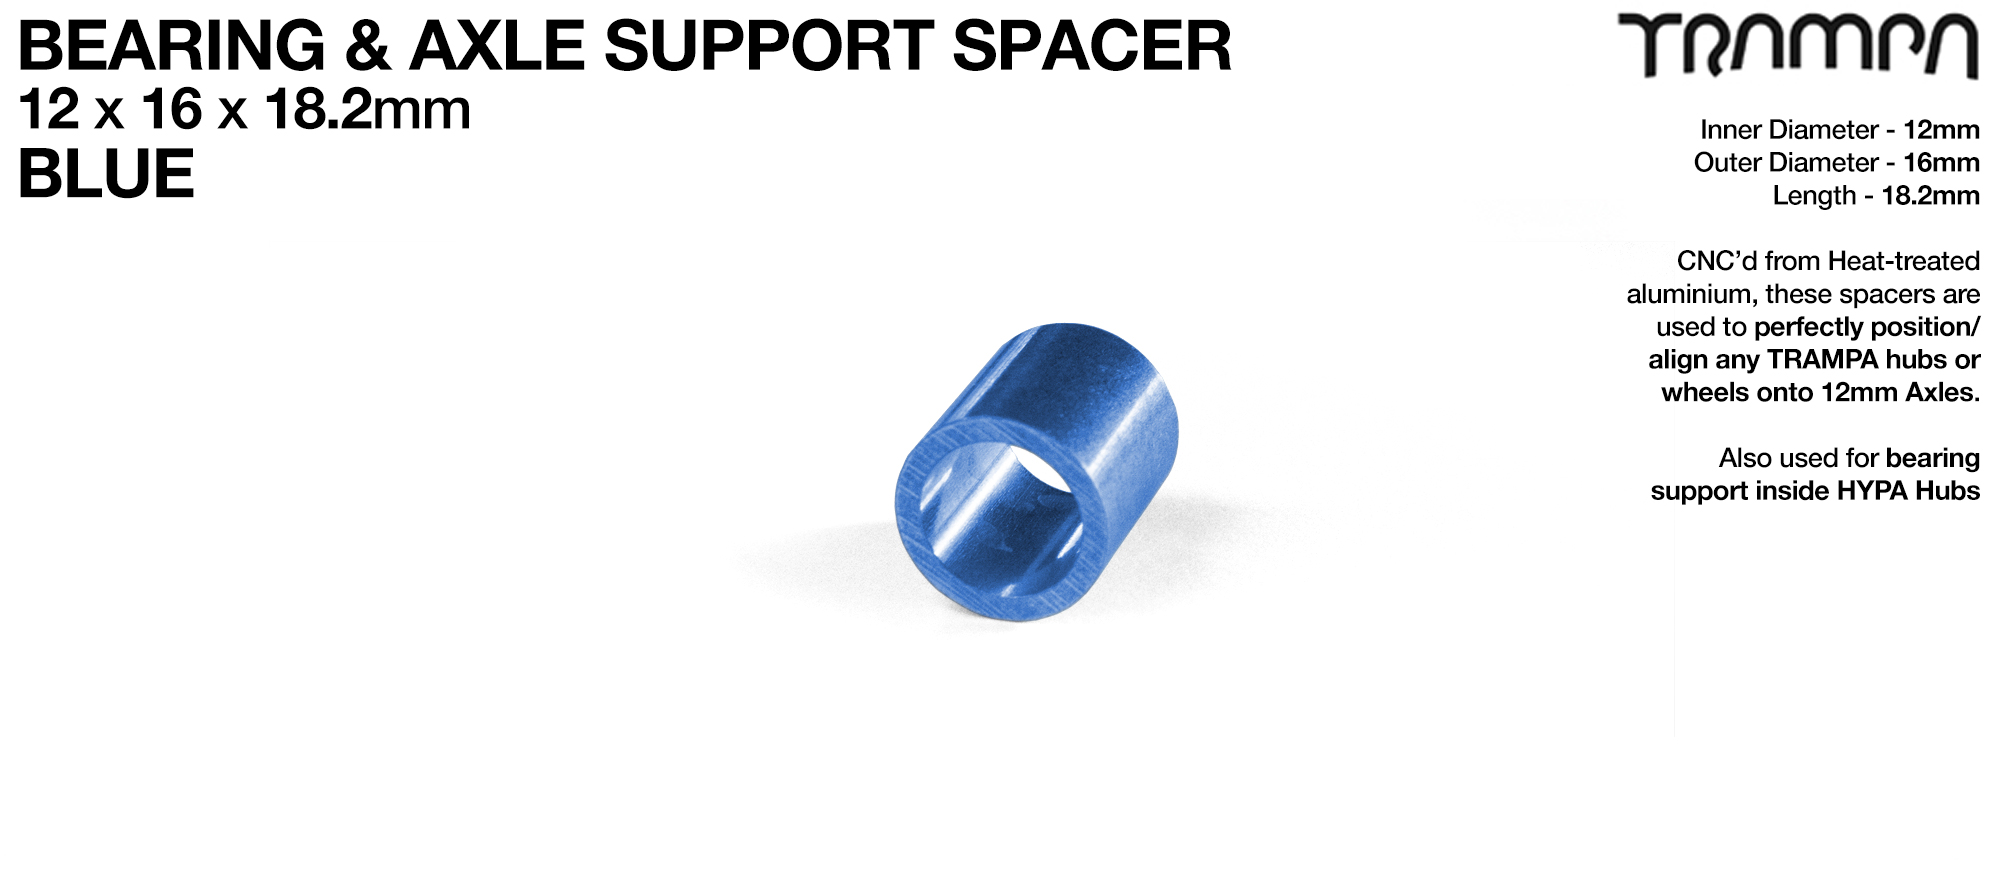 Wheel support spacer for all TRAMPA Wheels on 12mm ATB Axles - CNC precision 12mm x 16mm x 18.2mm - BLUE